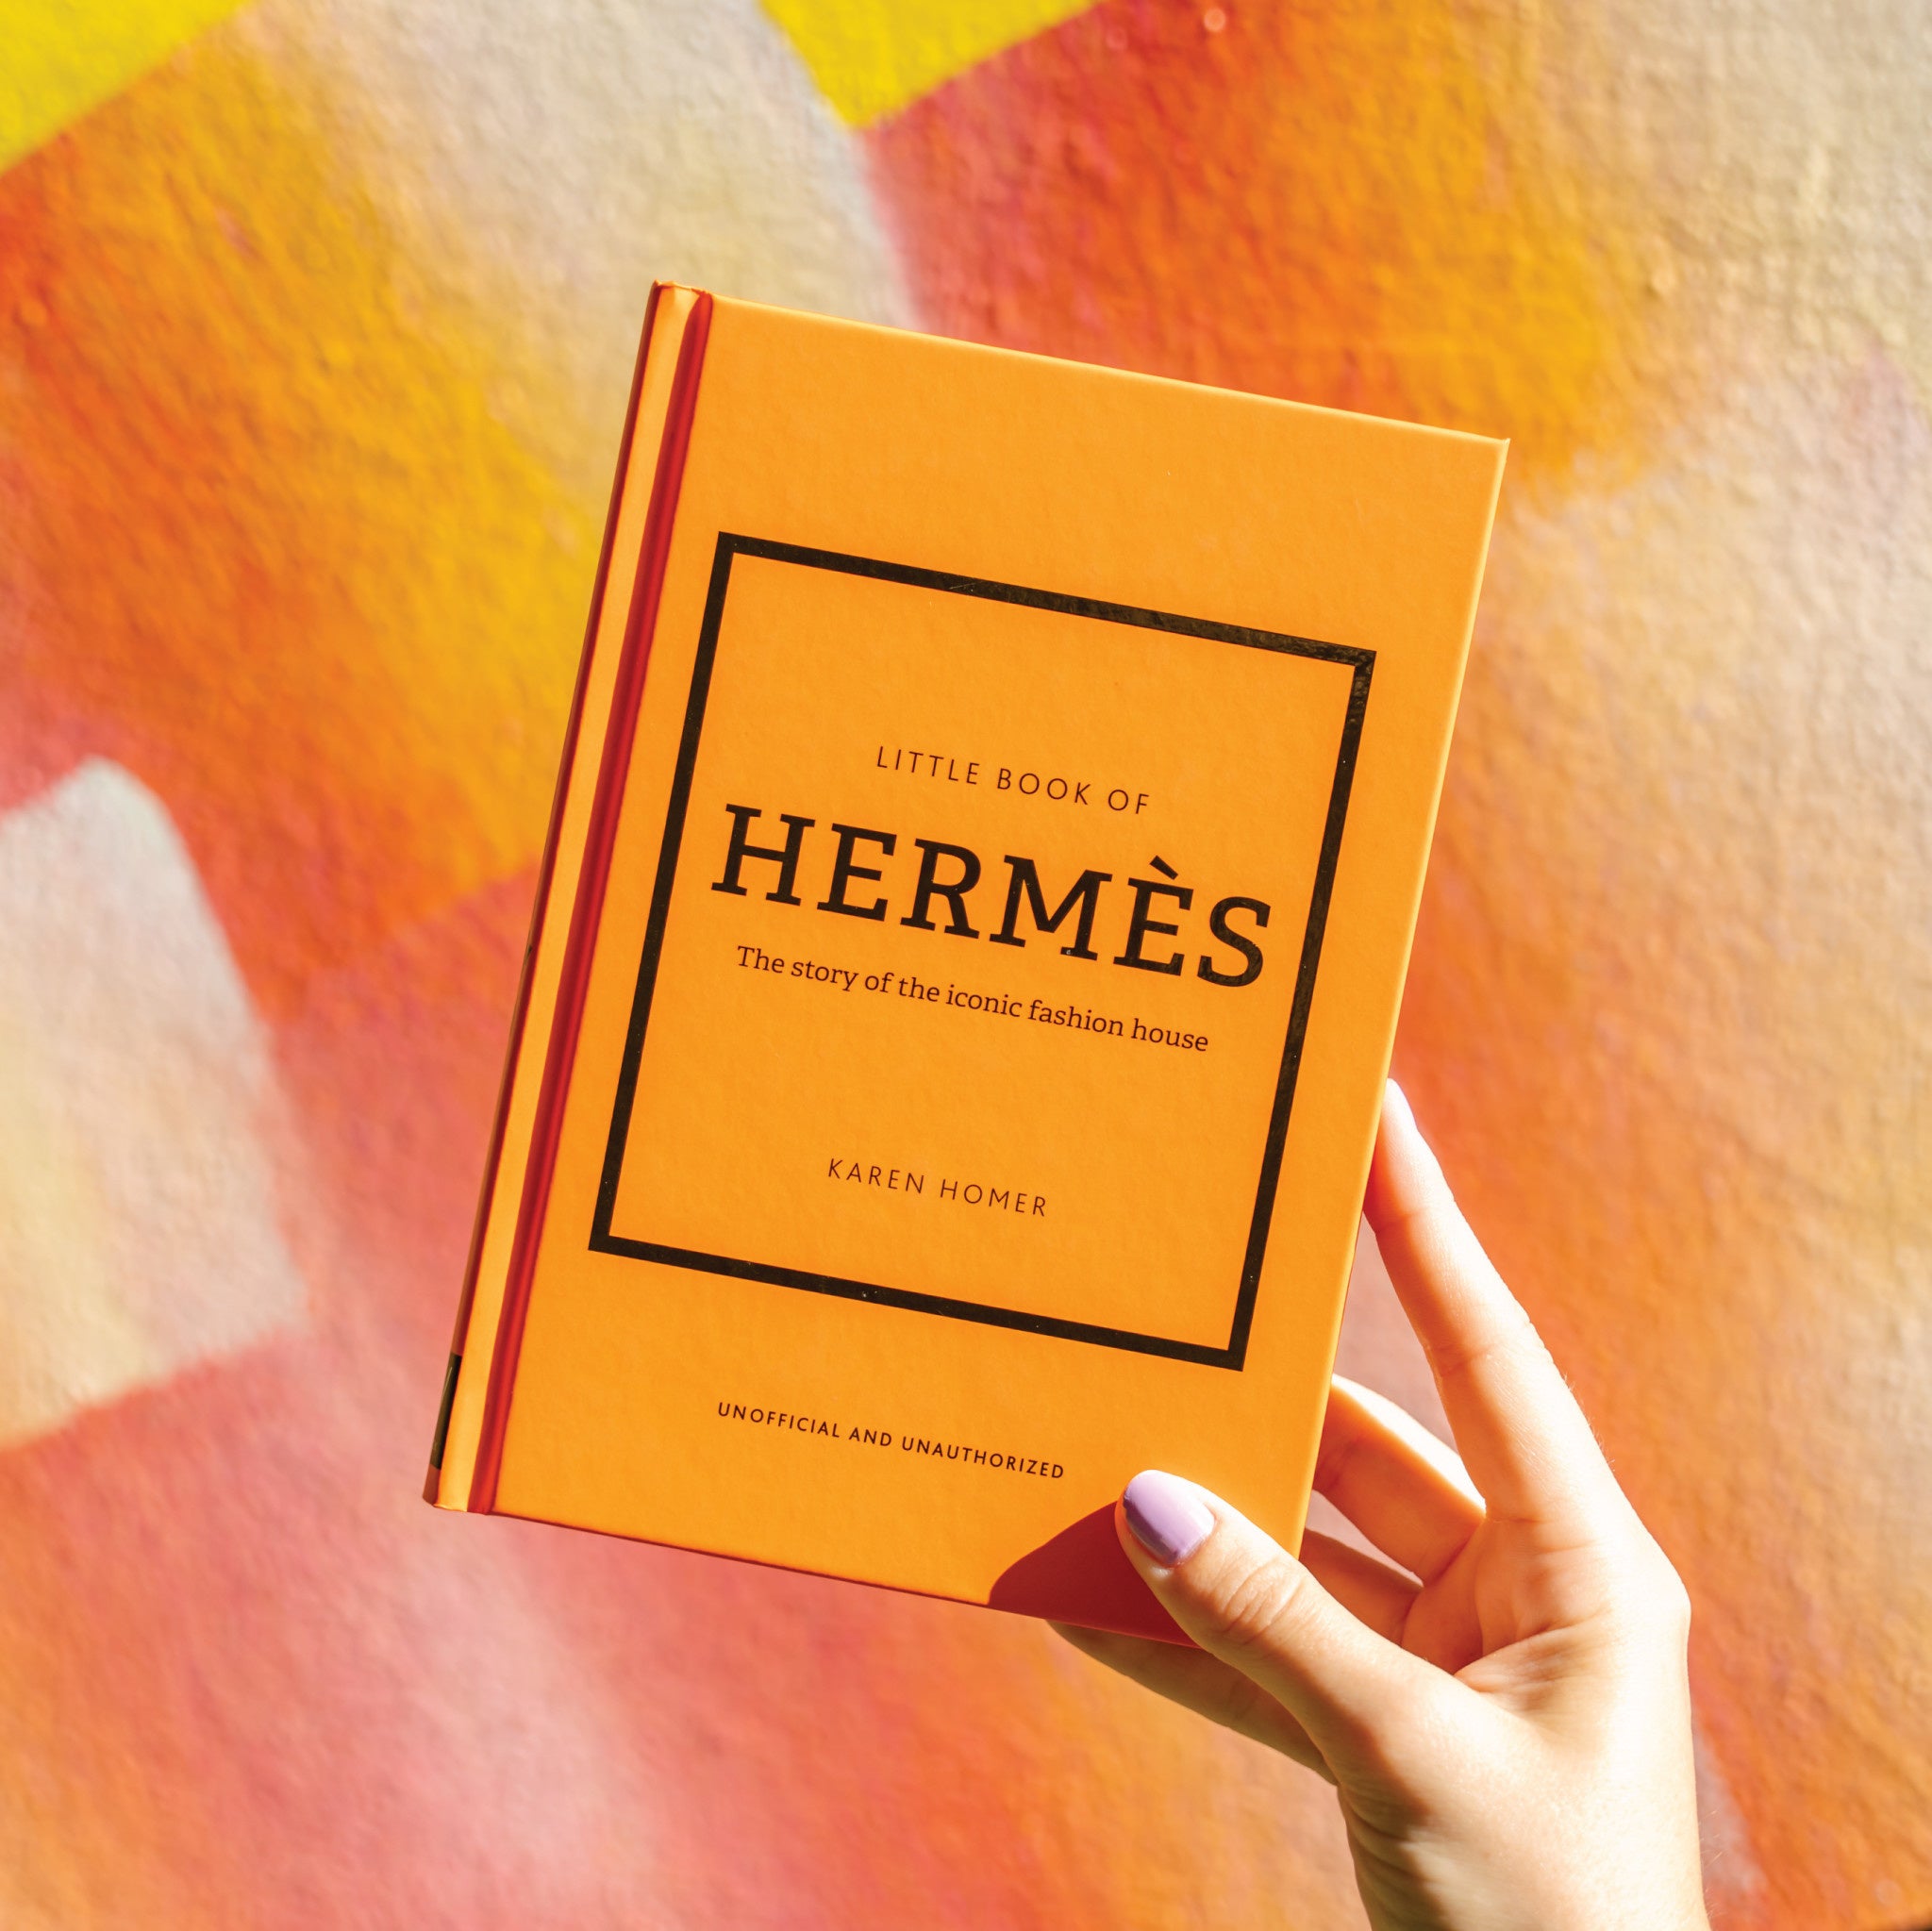 Little Book of Hermès: The Story of the Iconic Fashion House – The